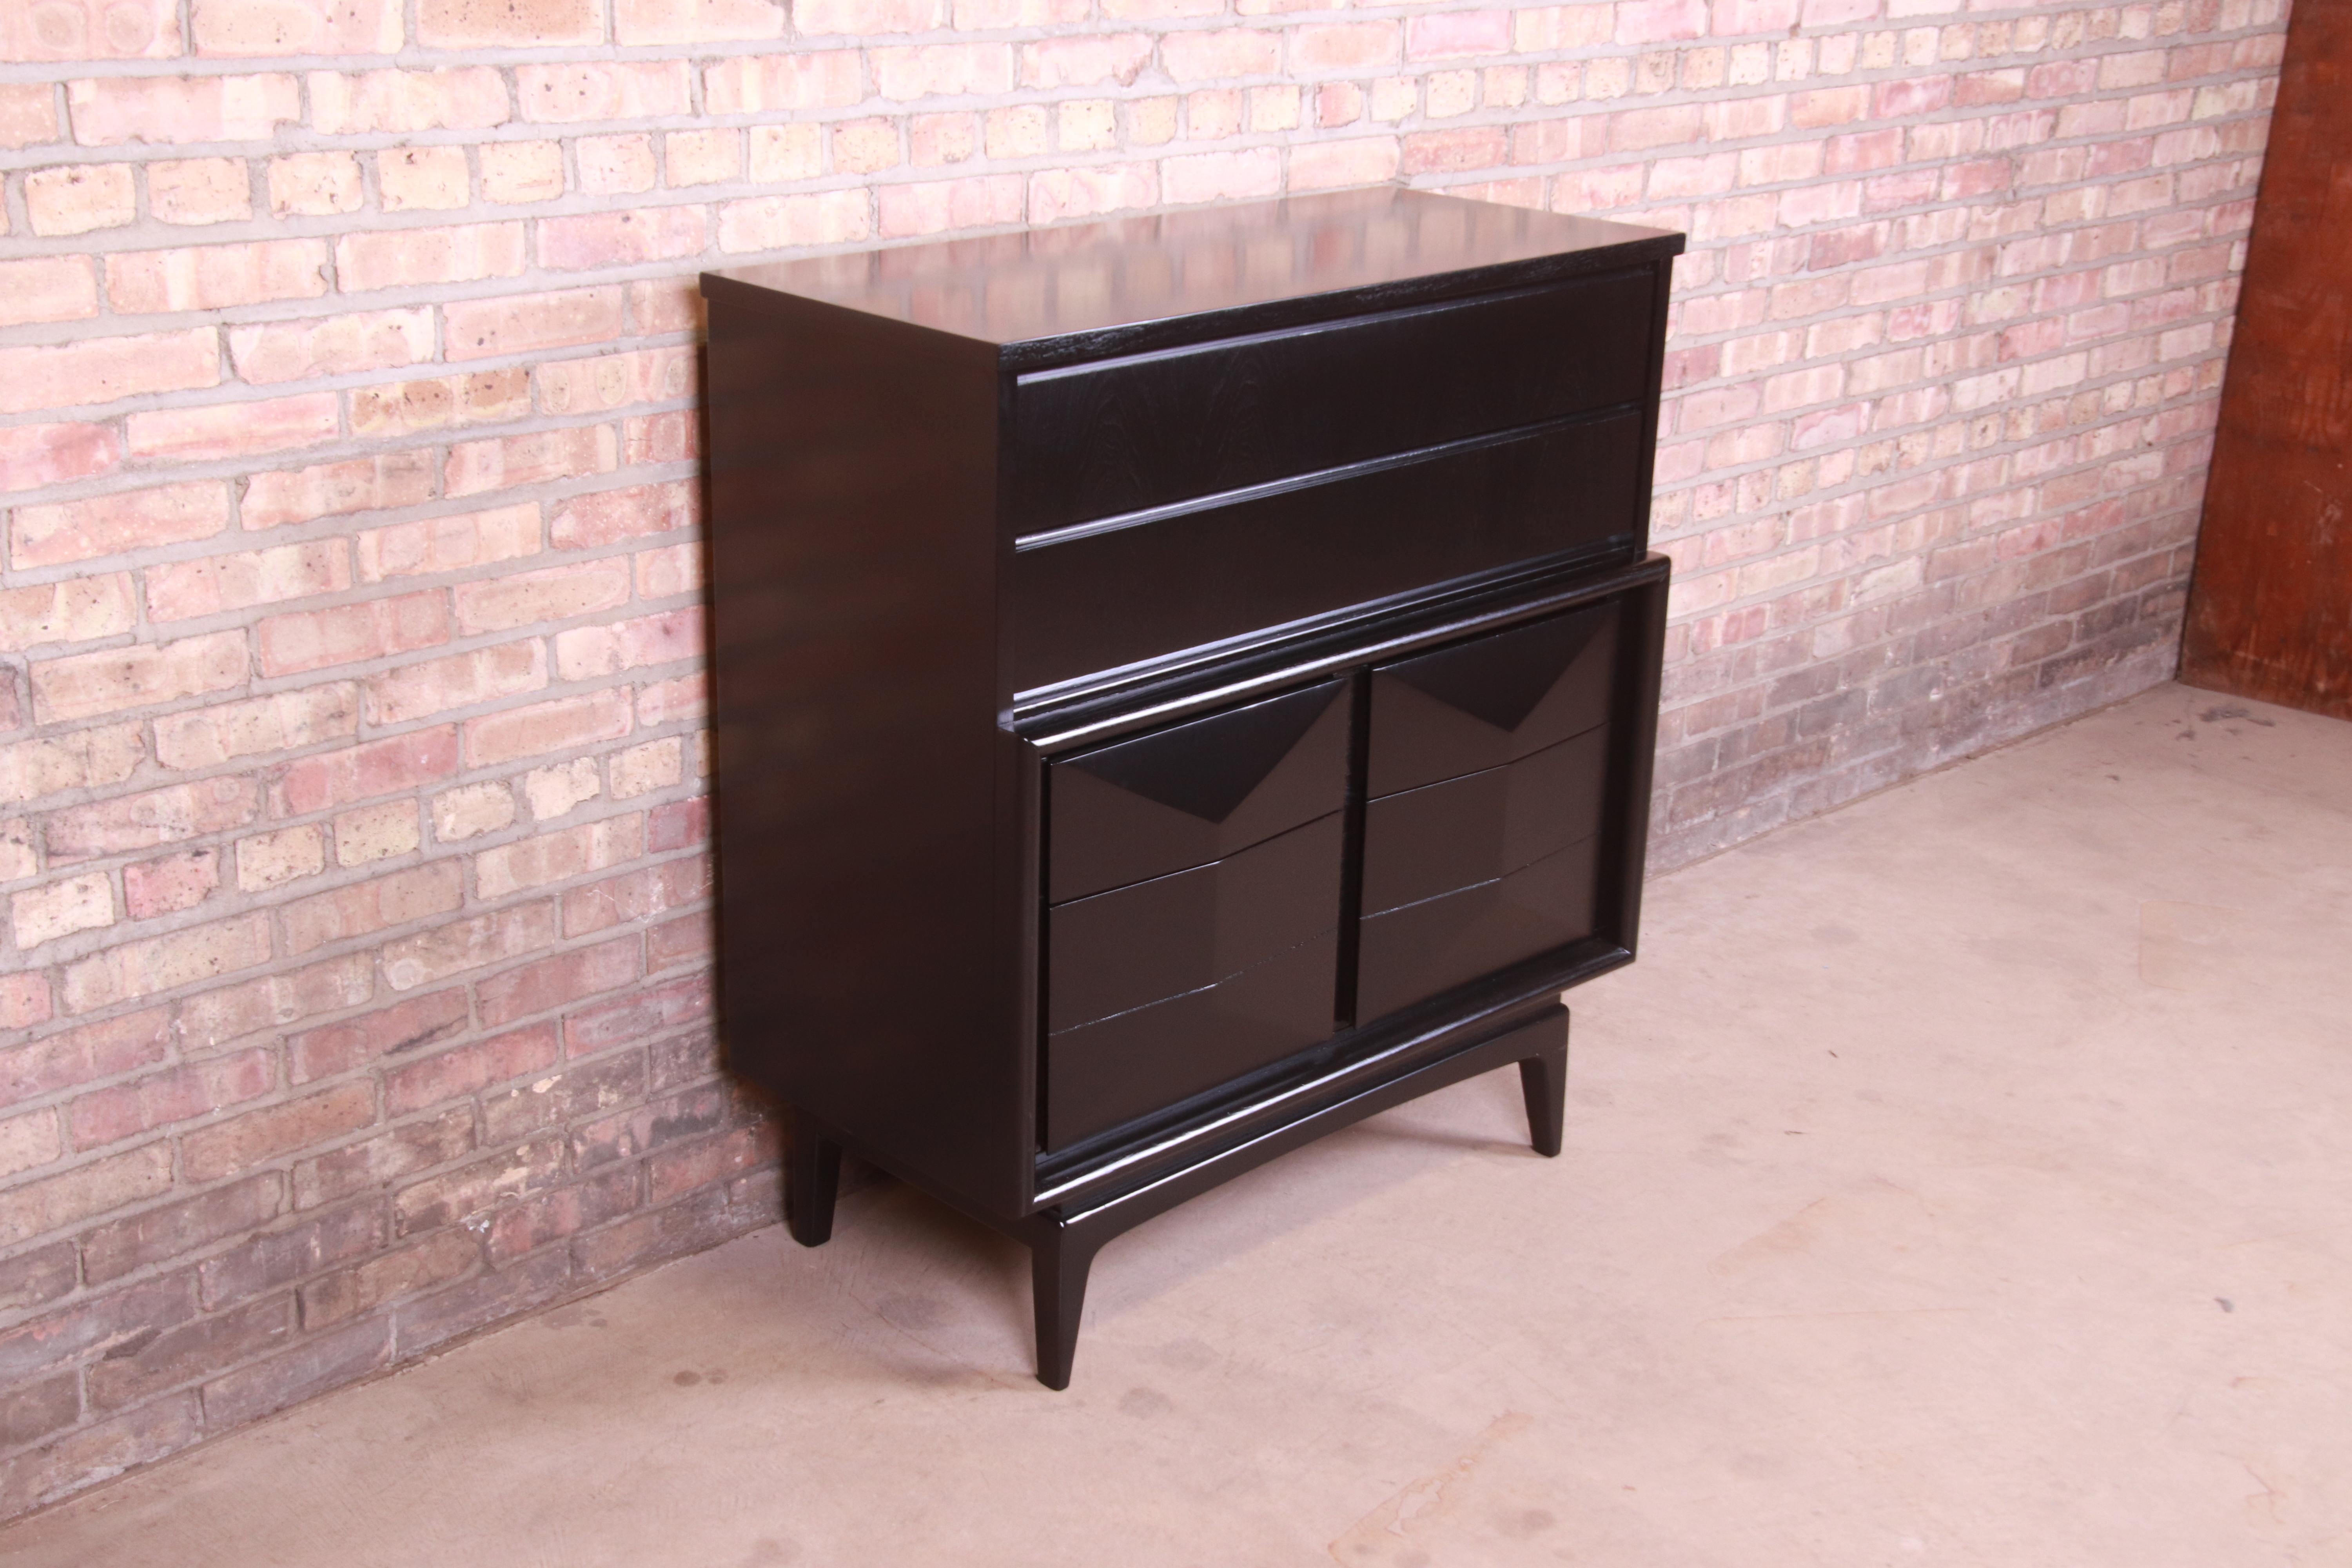 American Mid-Century Modern Black Lacquered Diamond Front Highboy Dresser by United